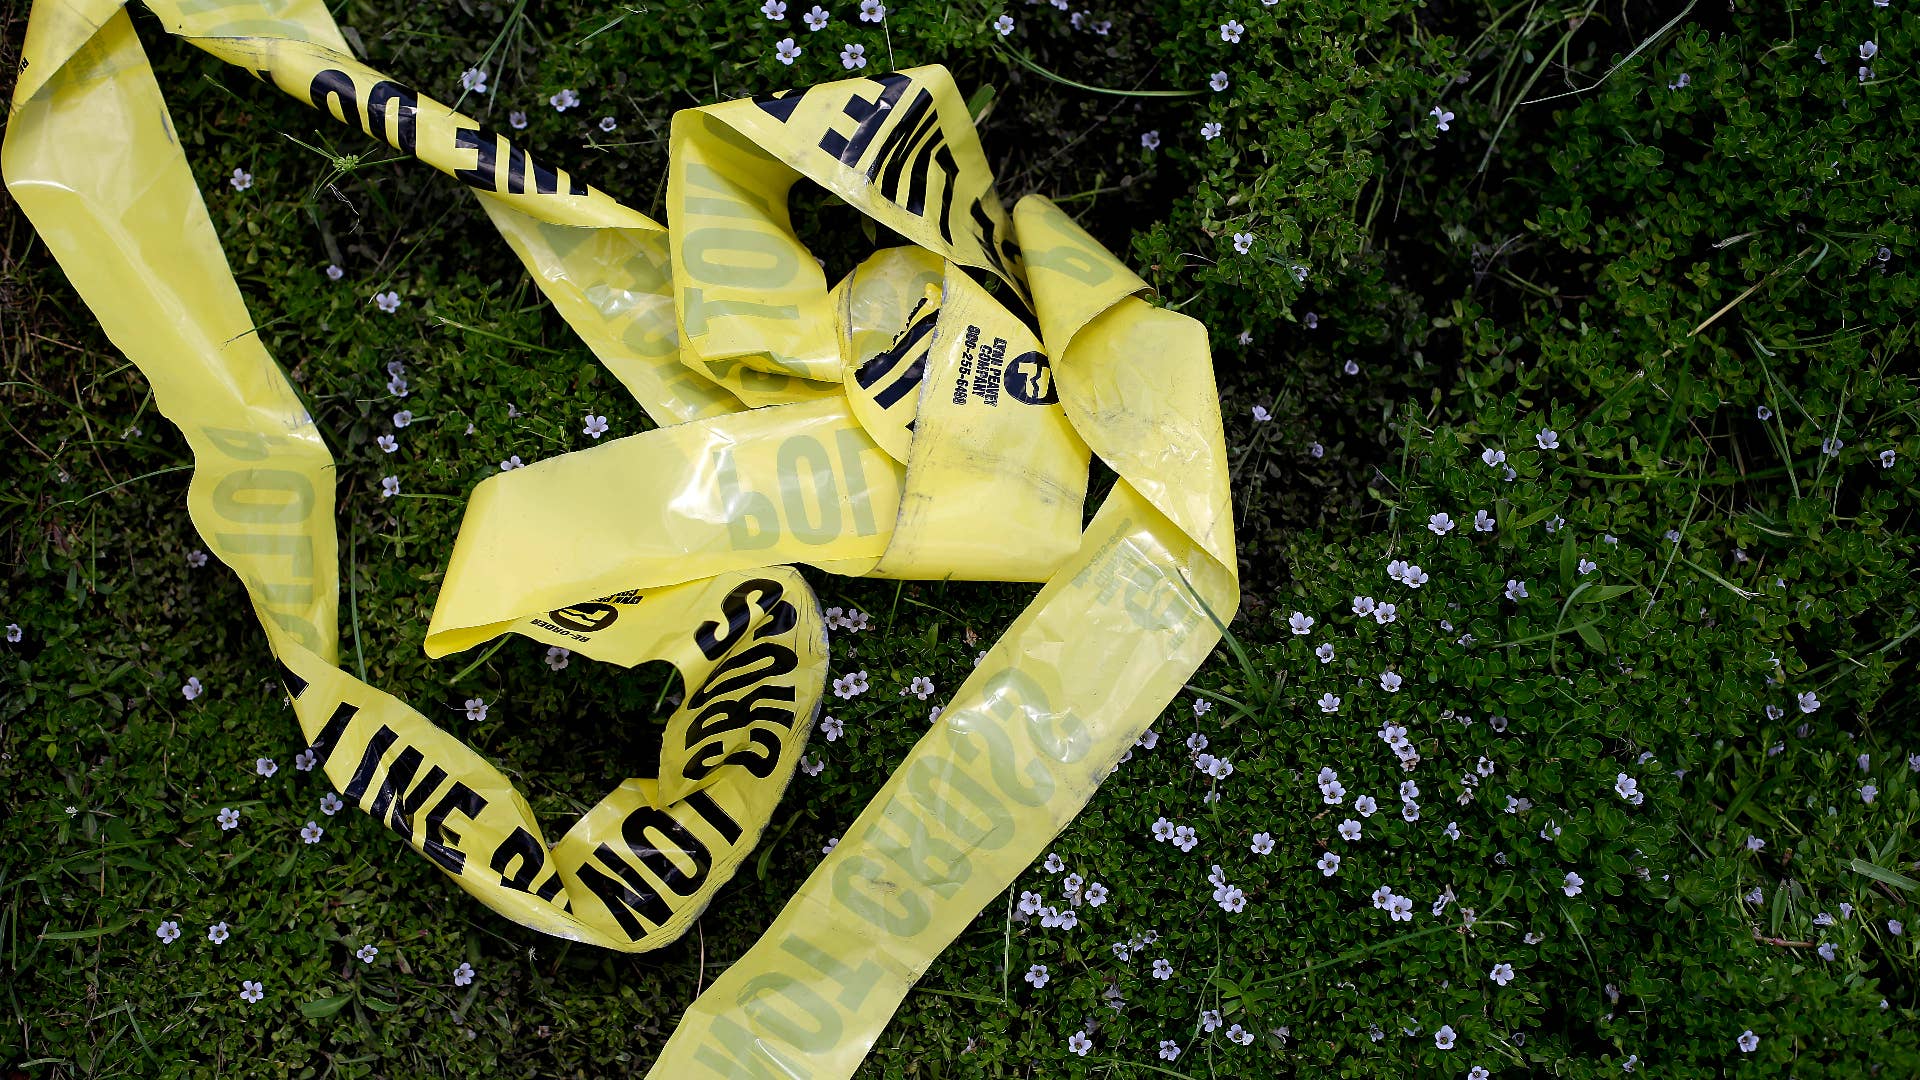 Yellow police crime scene tape rests in the grass.